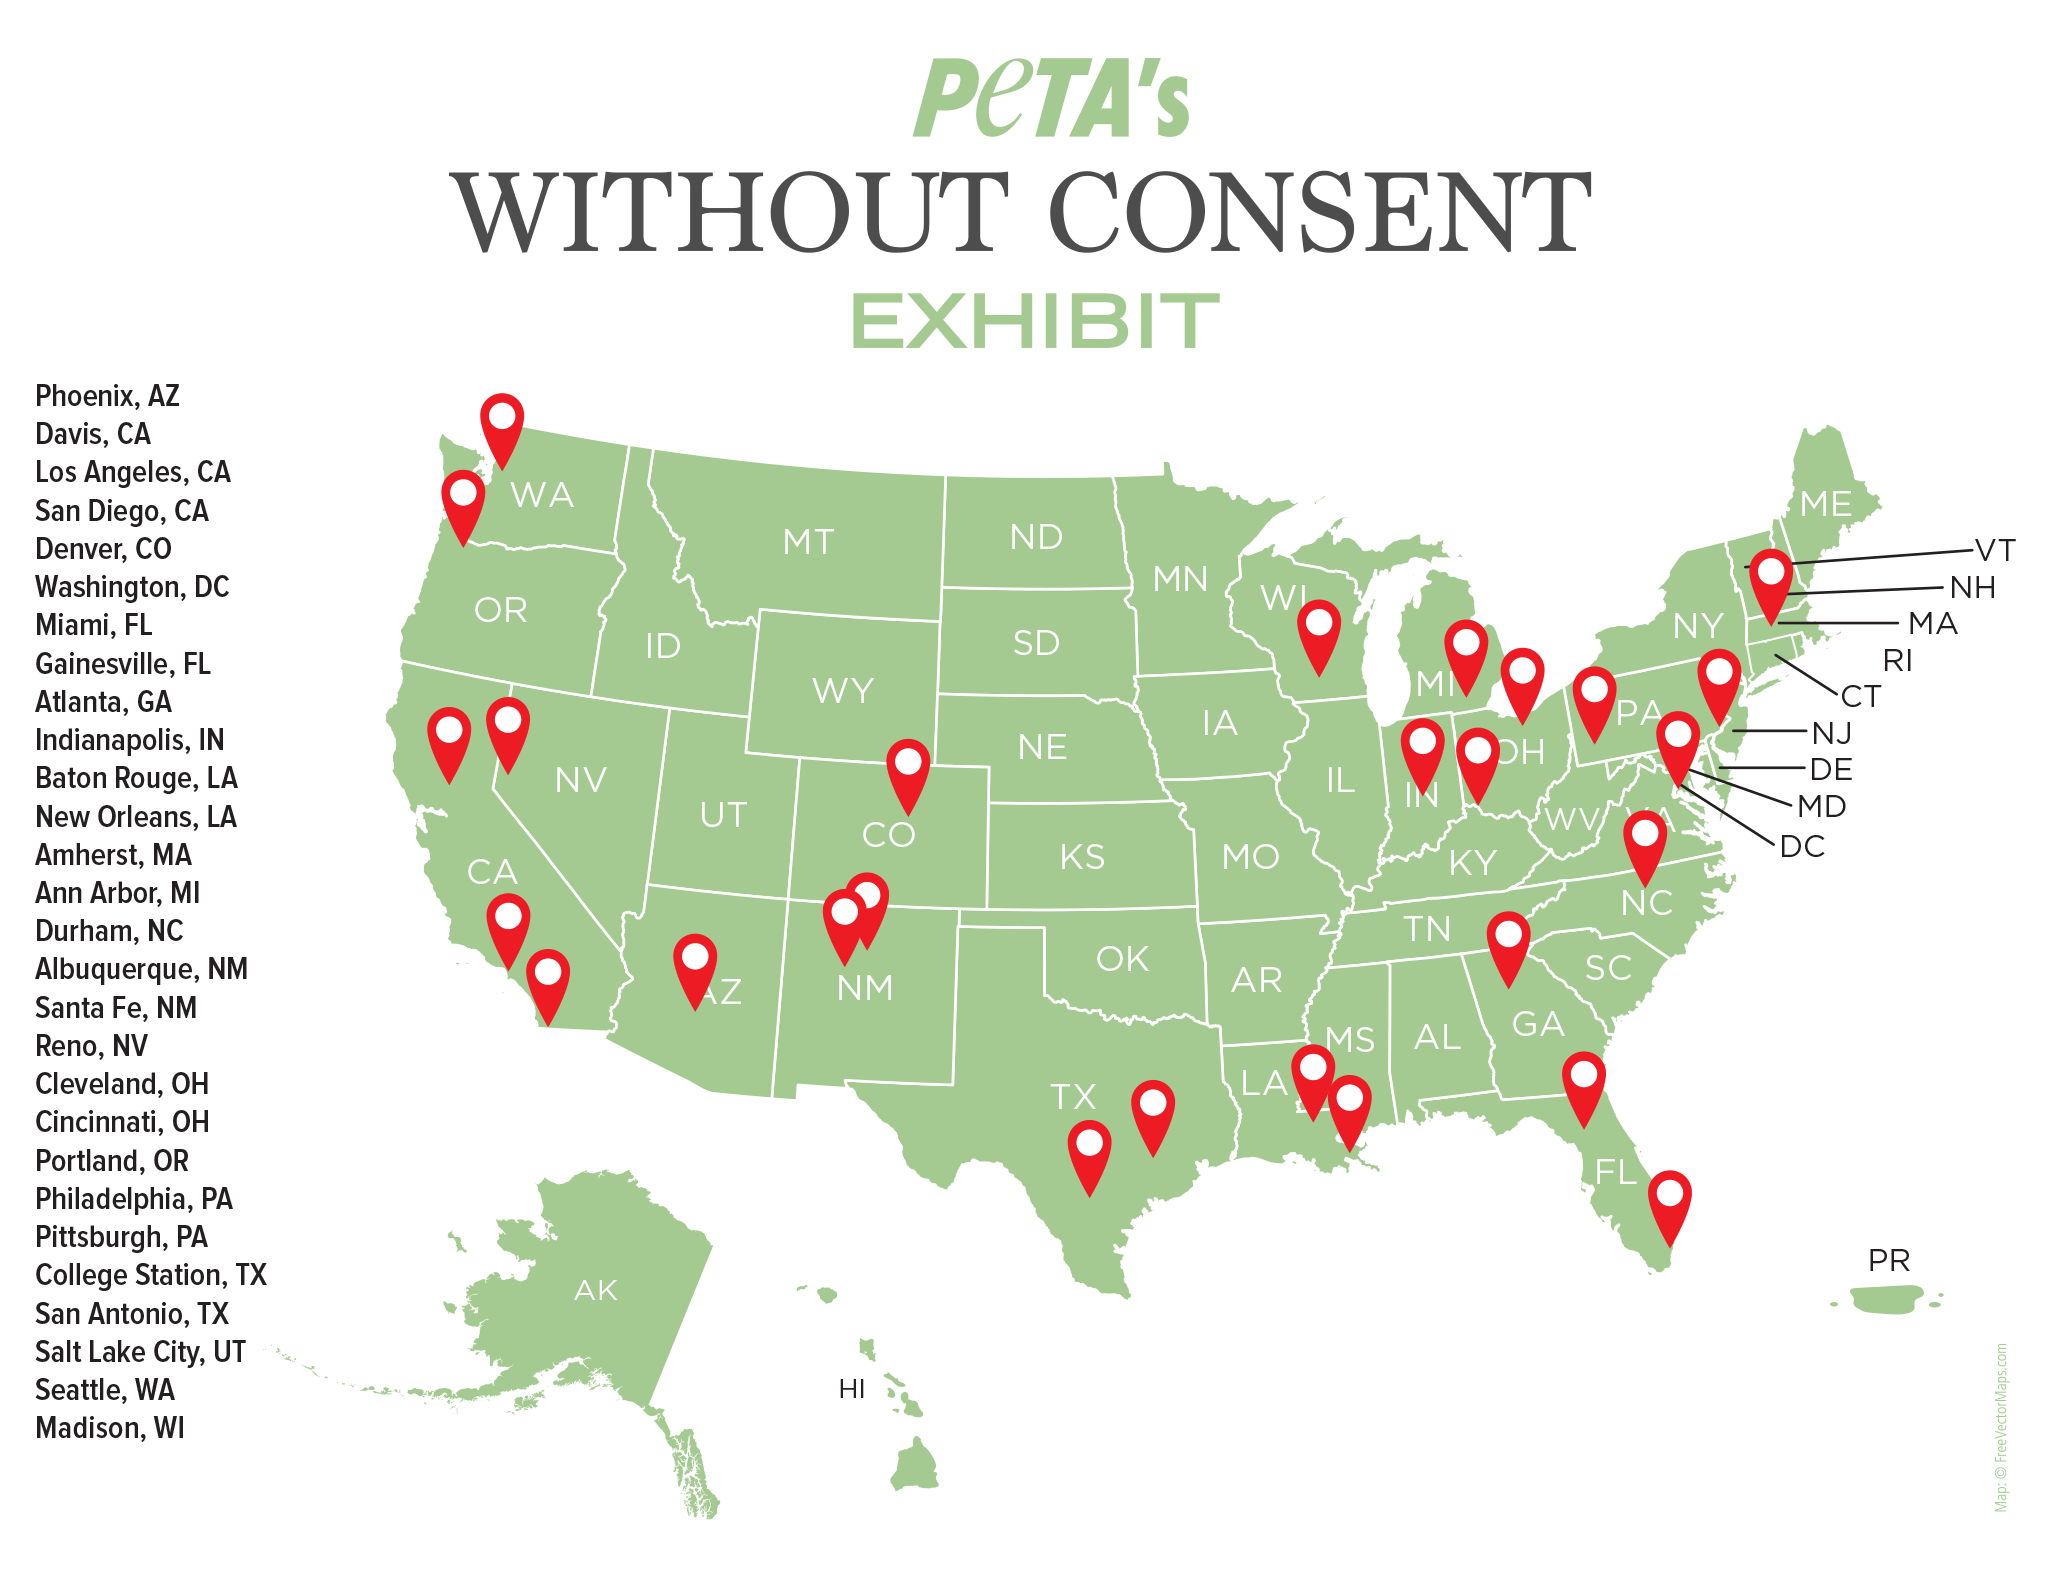 PETA's Without Consent Exhibit map